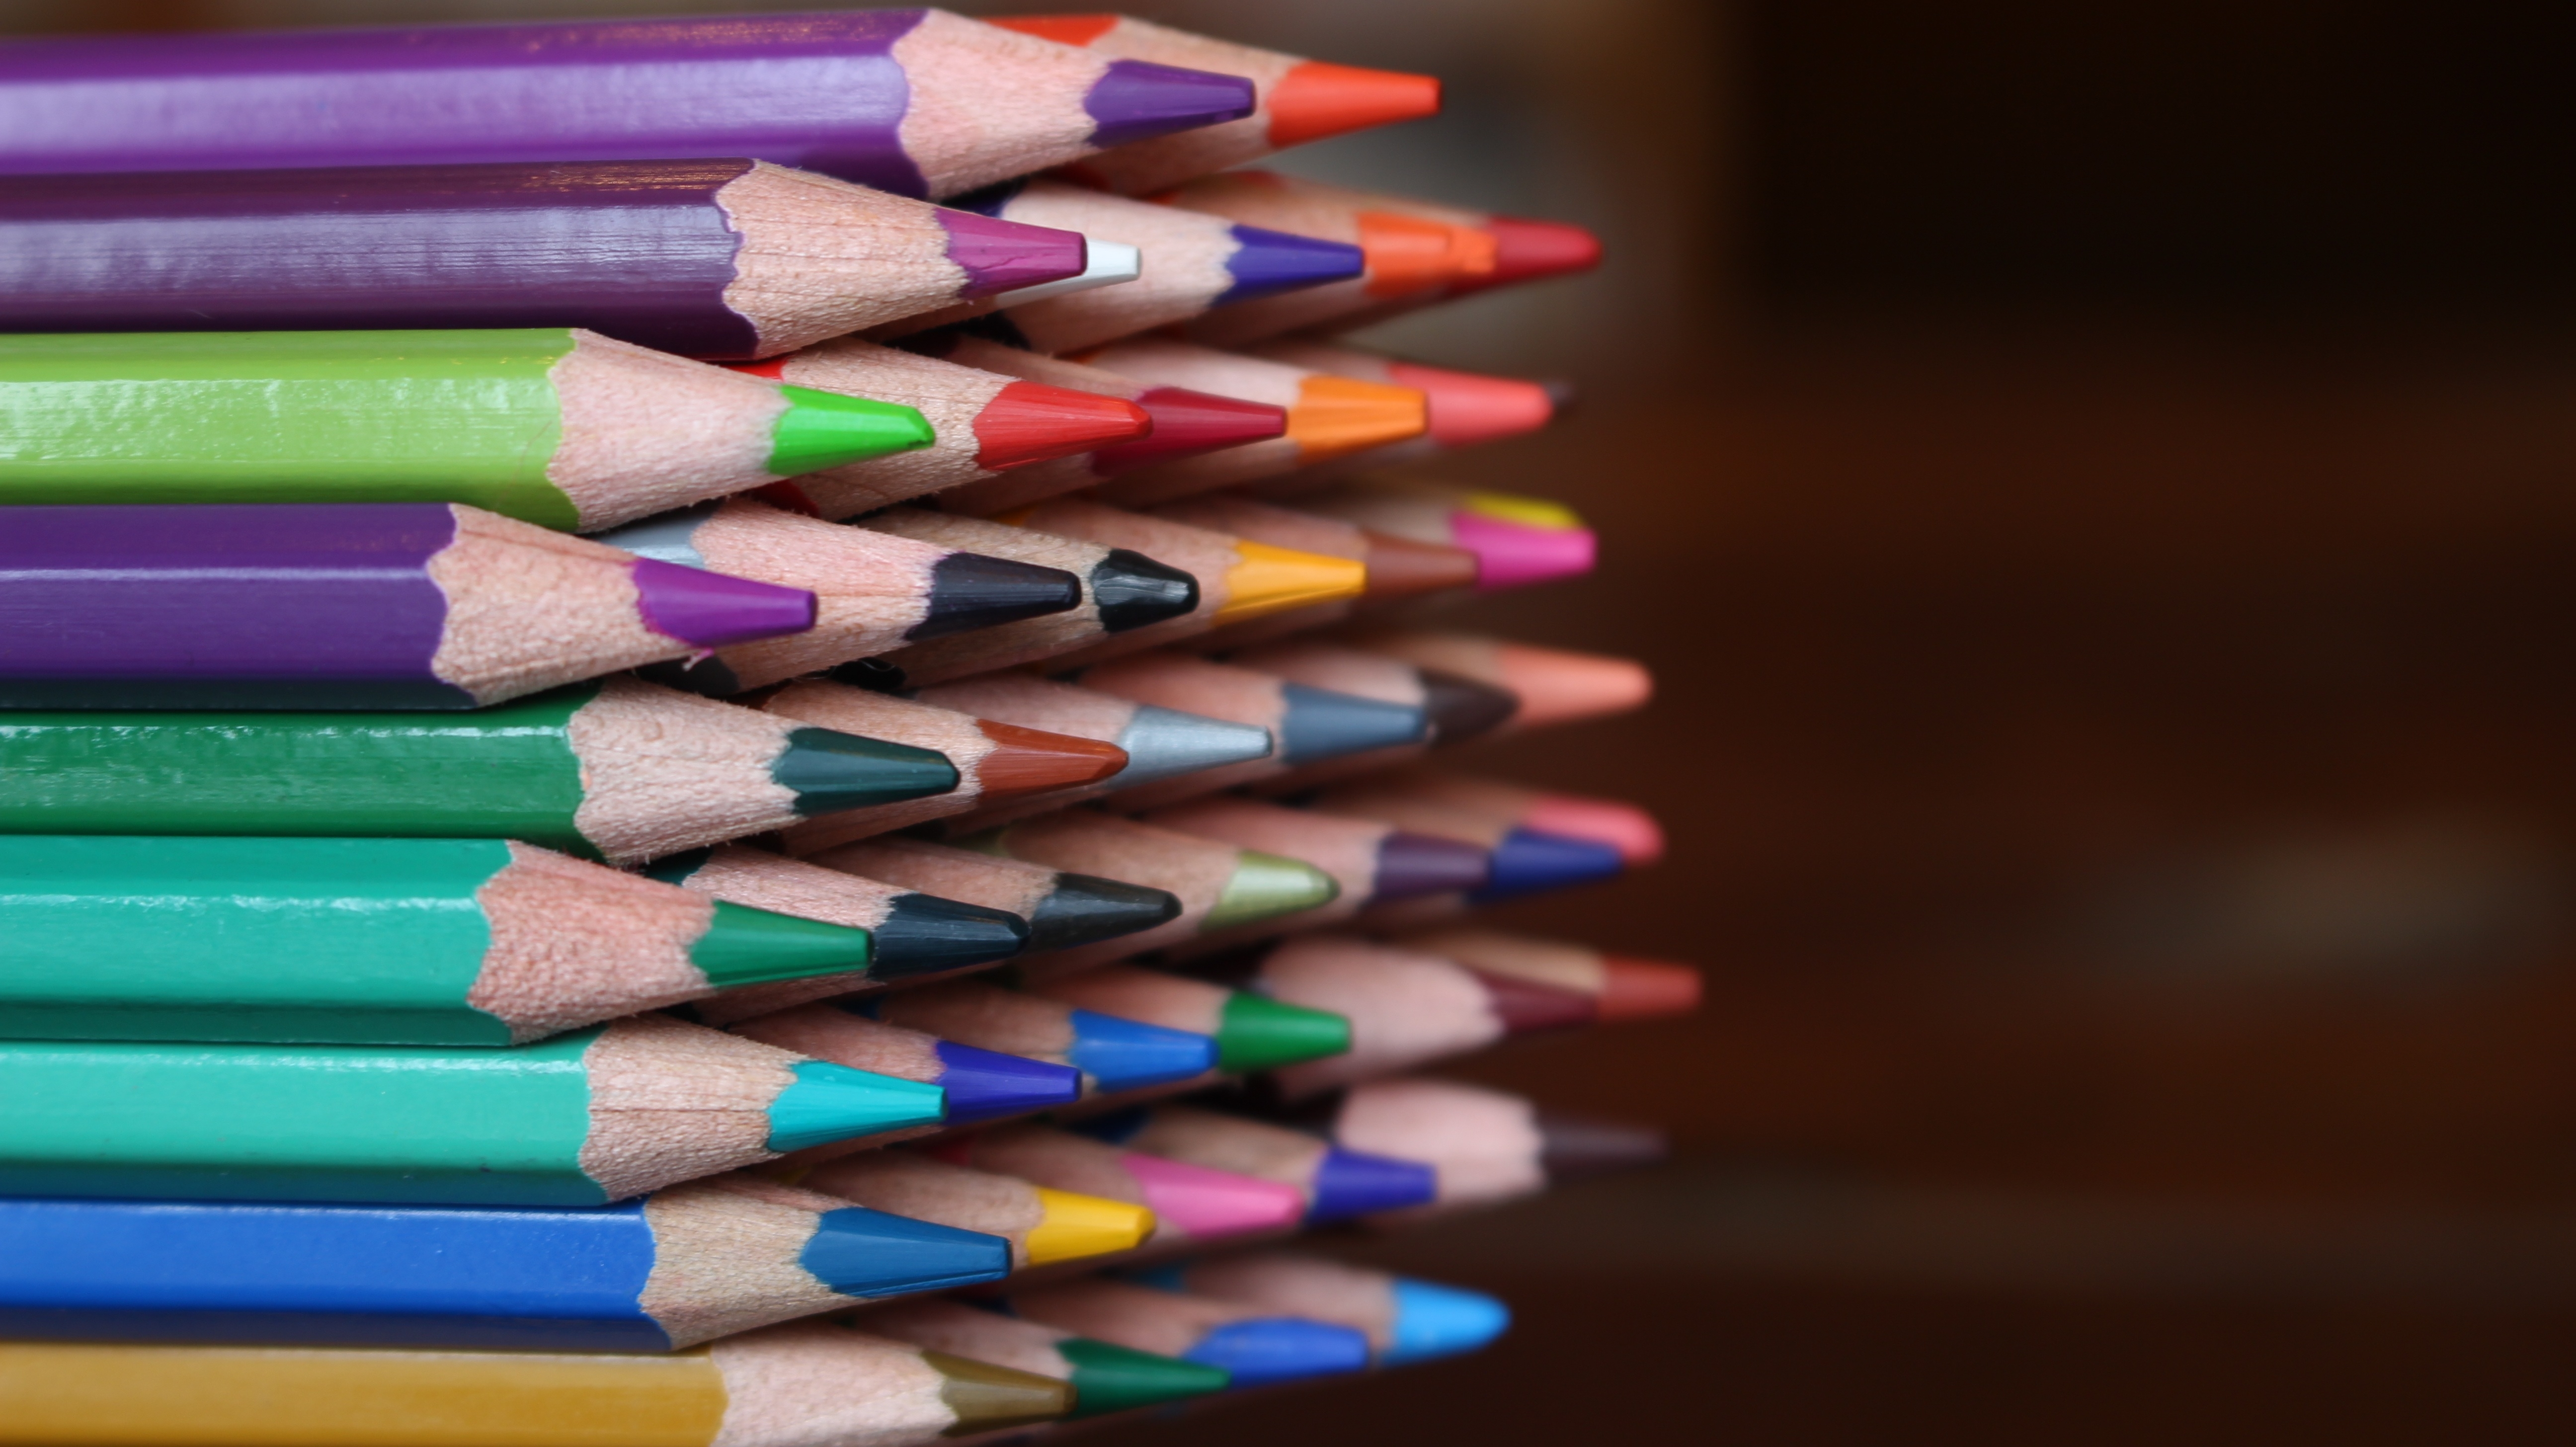 Sharpened colored pencils